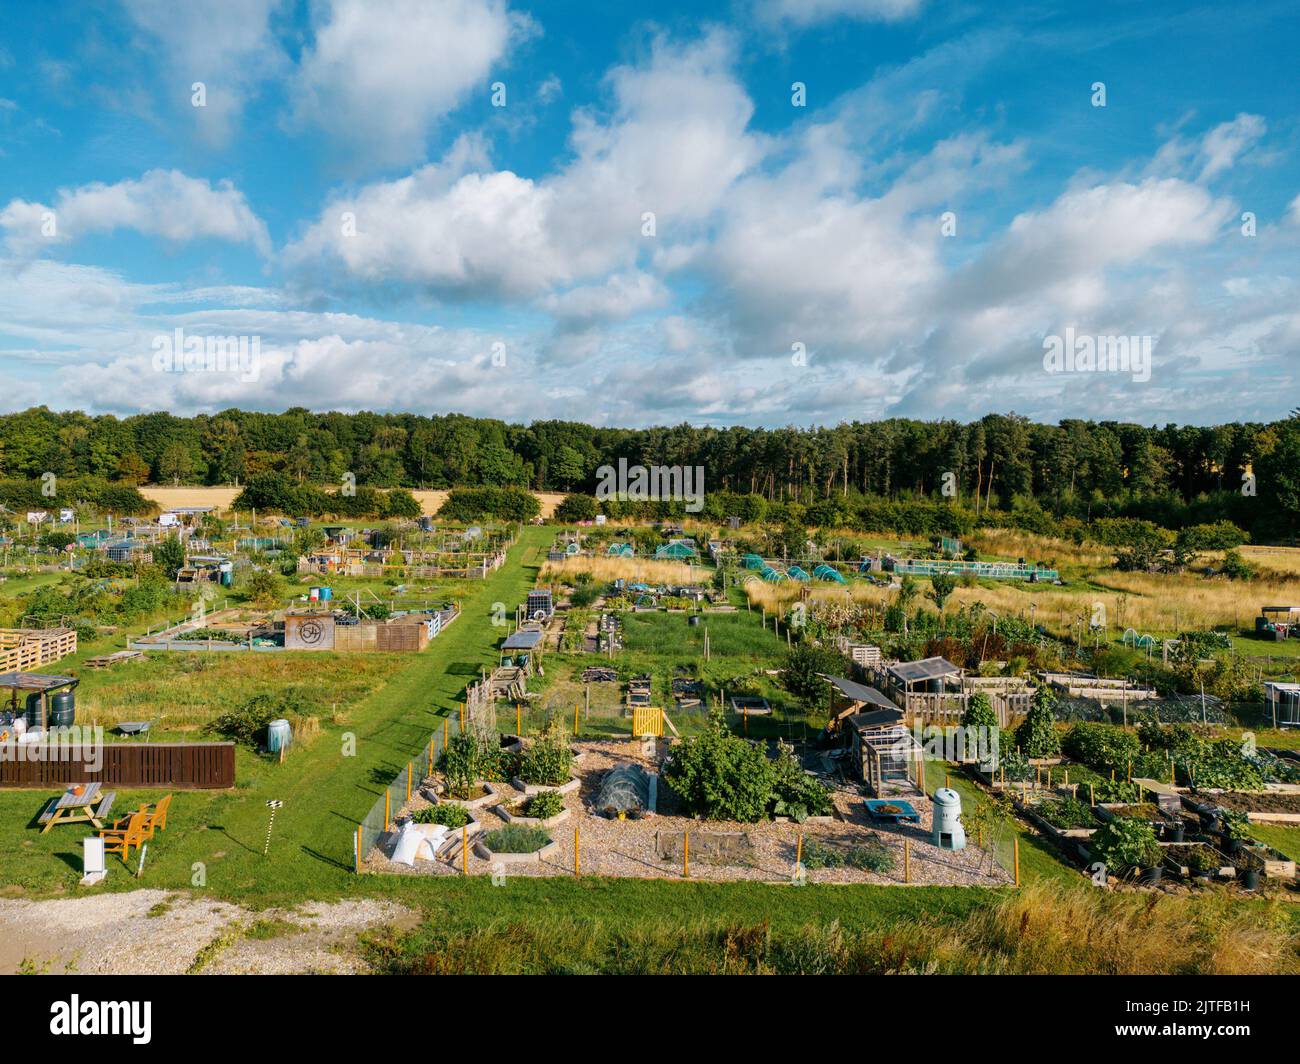 Aerial view of allotments for gardening vegetables Stock Photo